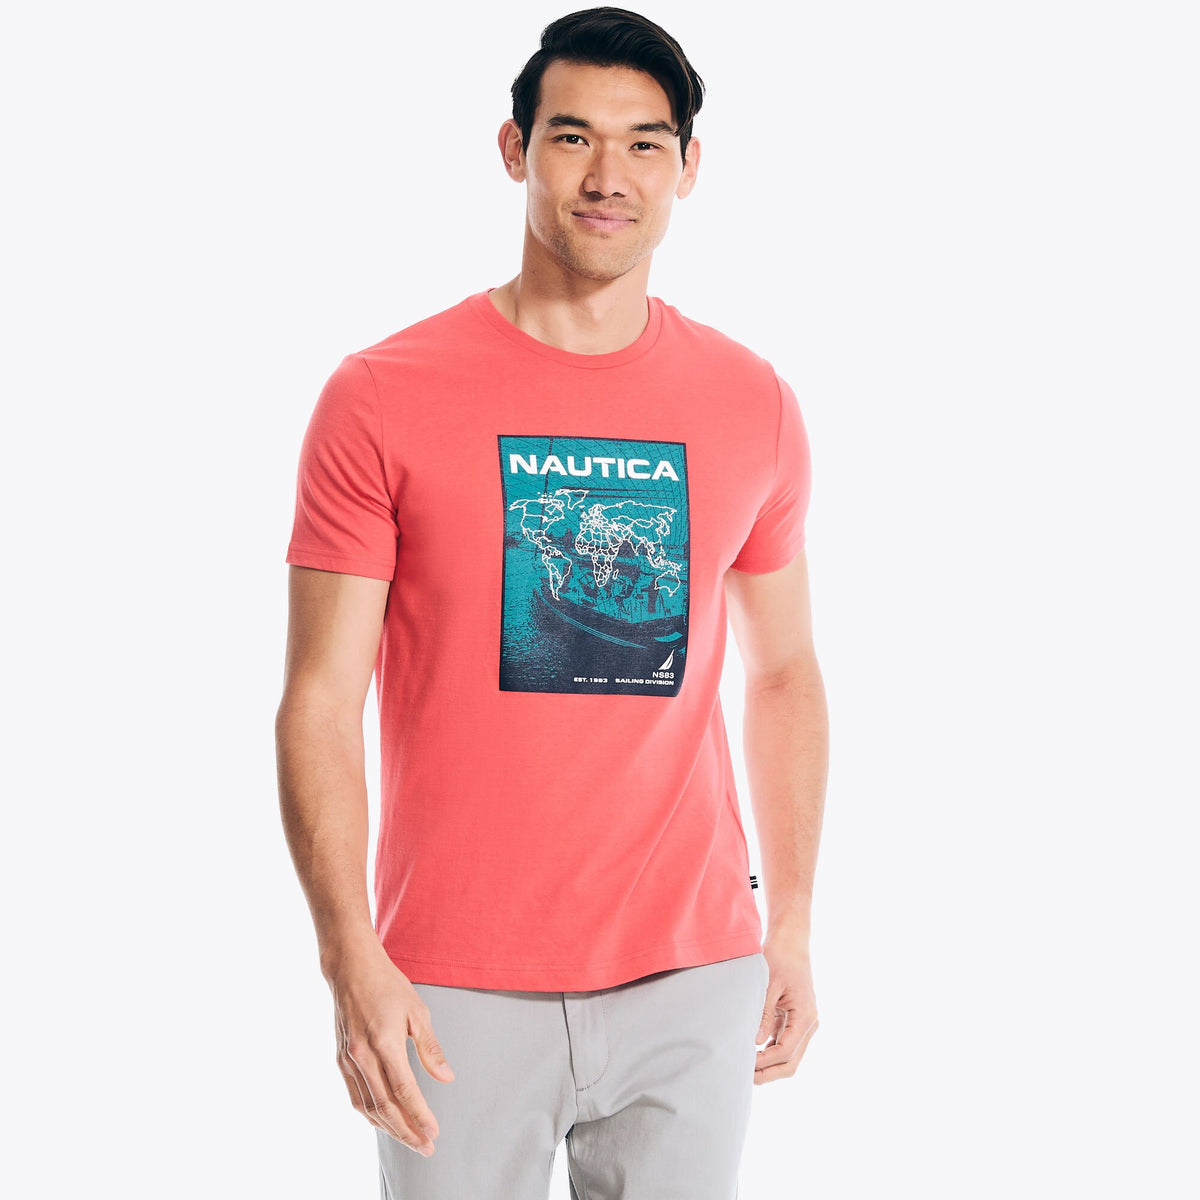 Nautica Men's Big & Tall Sustainably Crafted Sailing Division Graphic T-Shirt Dark Coral Cape